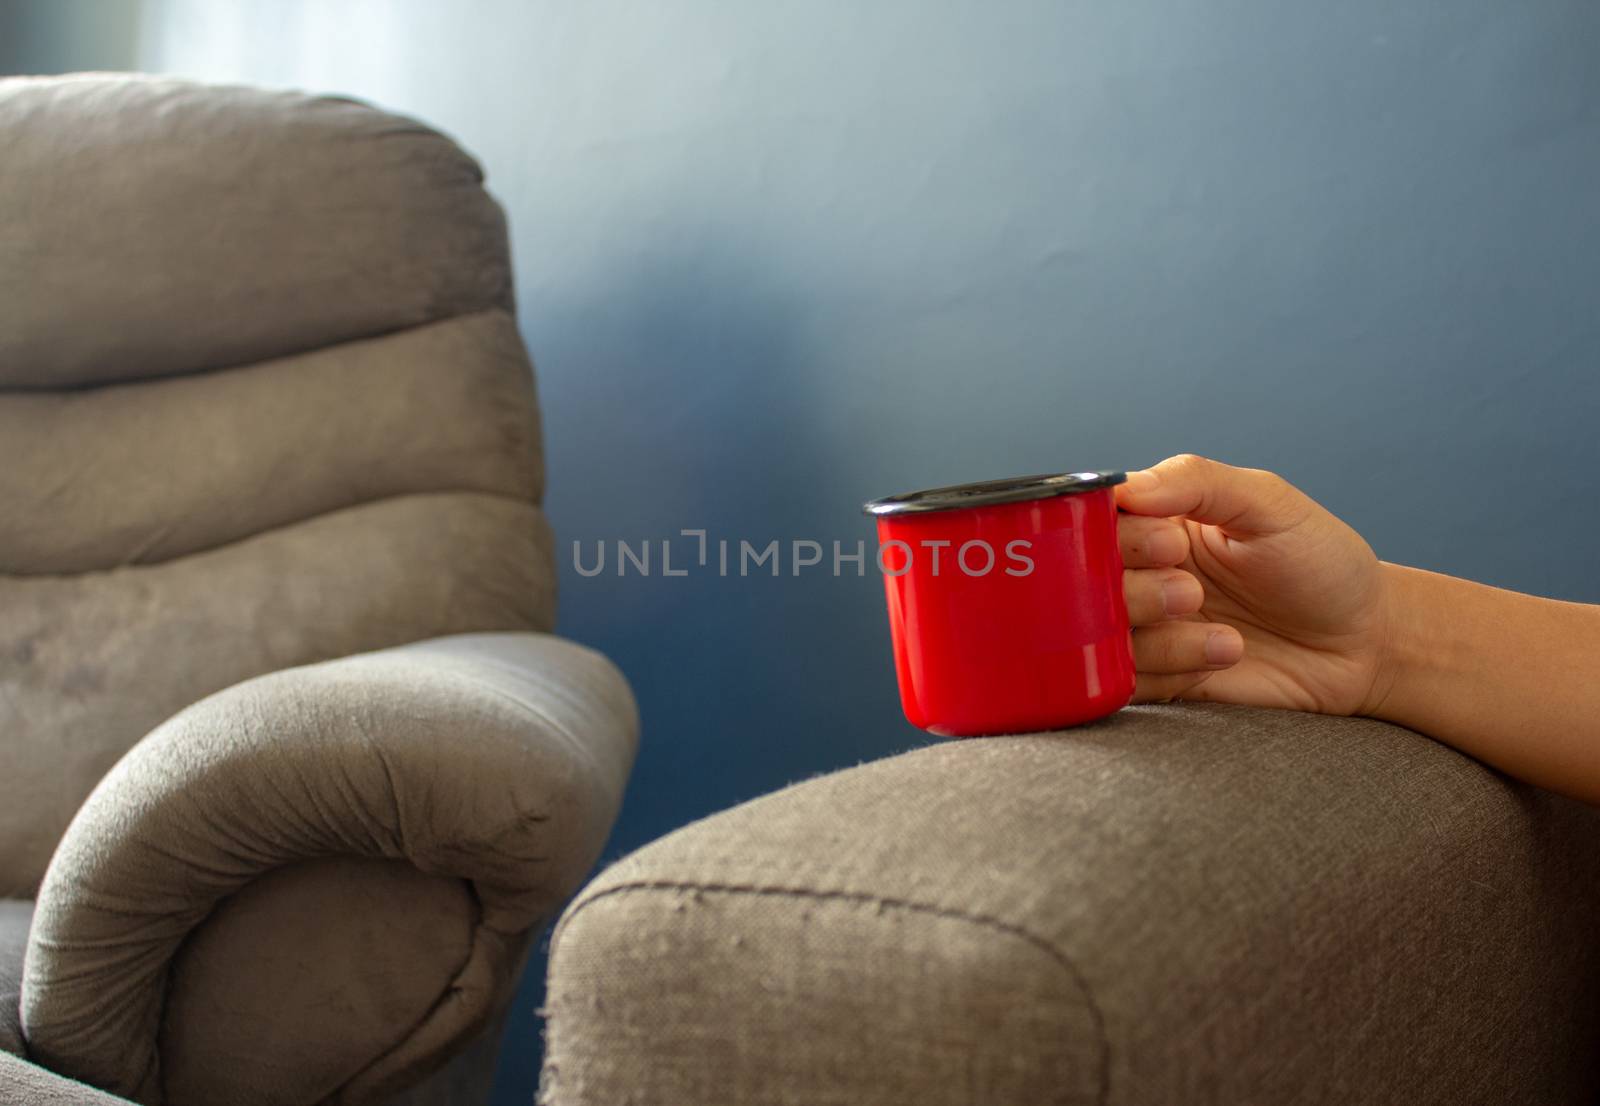 Woman holding a red metal cup resting her hand on the sofa's arm, next to a couch